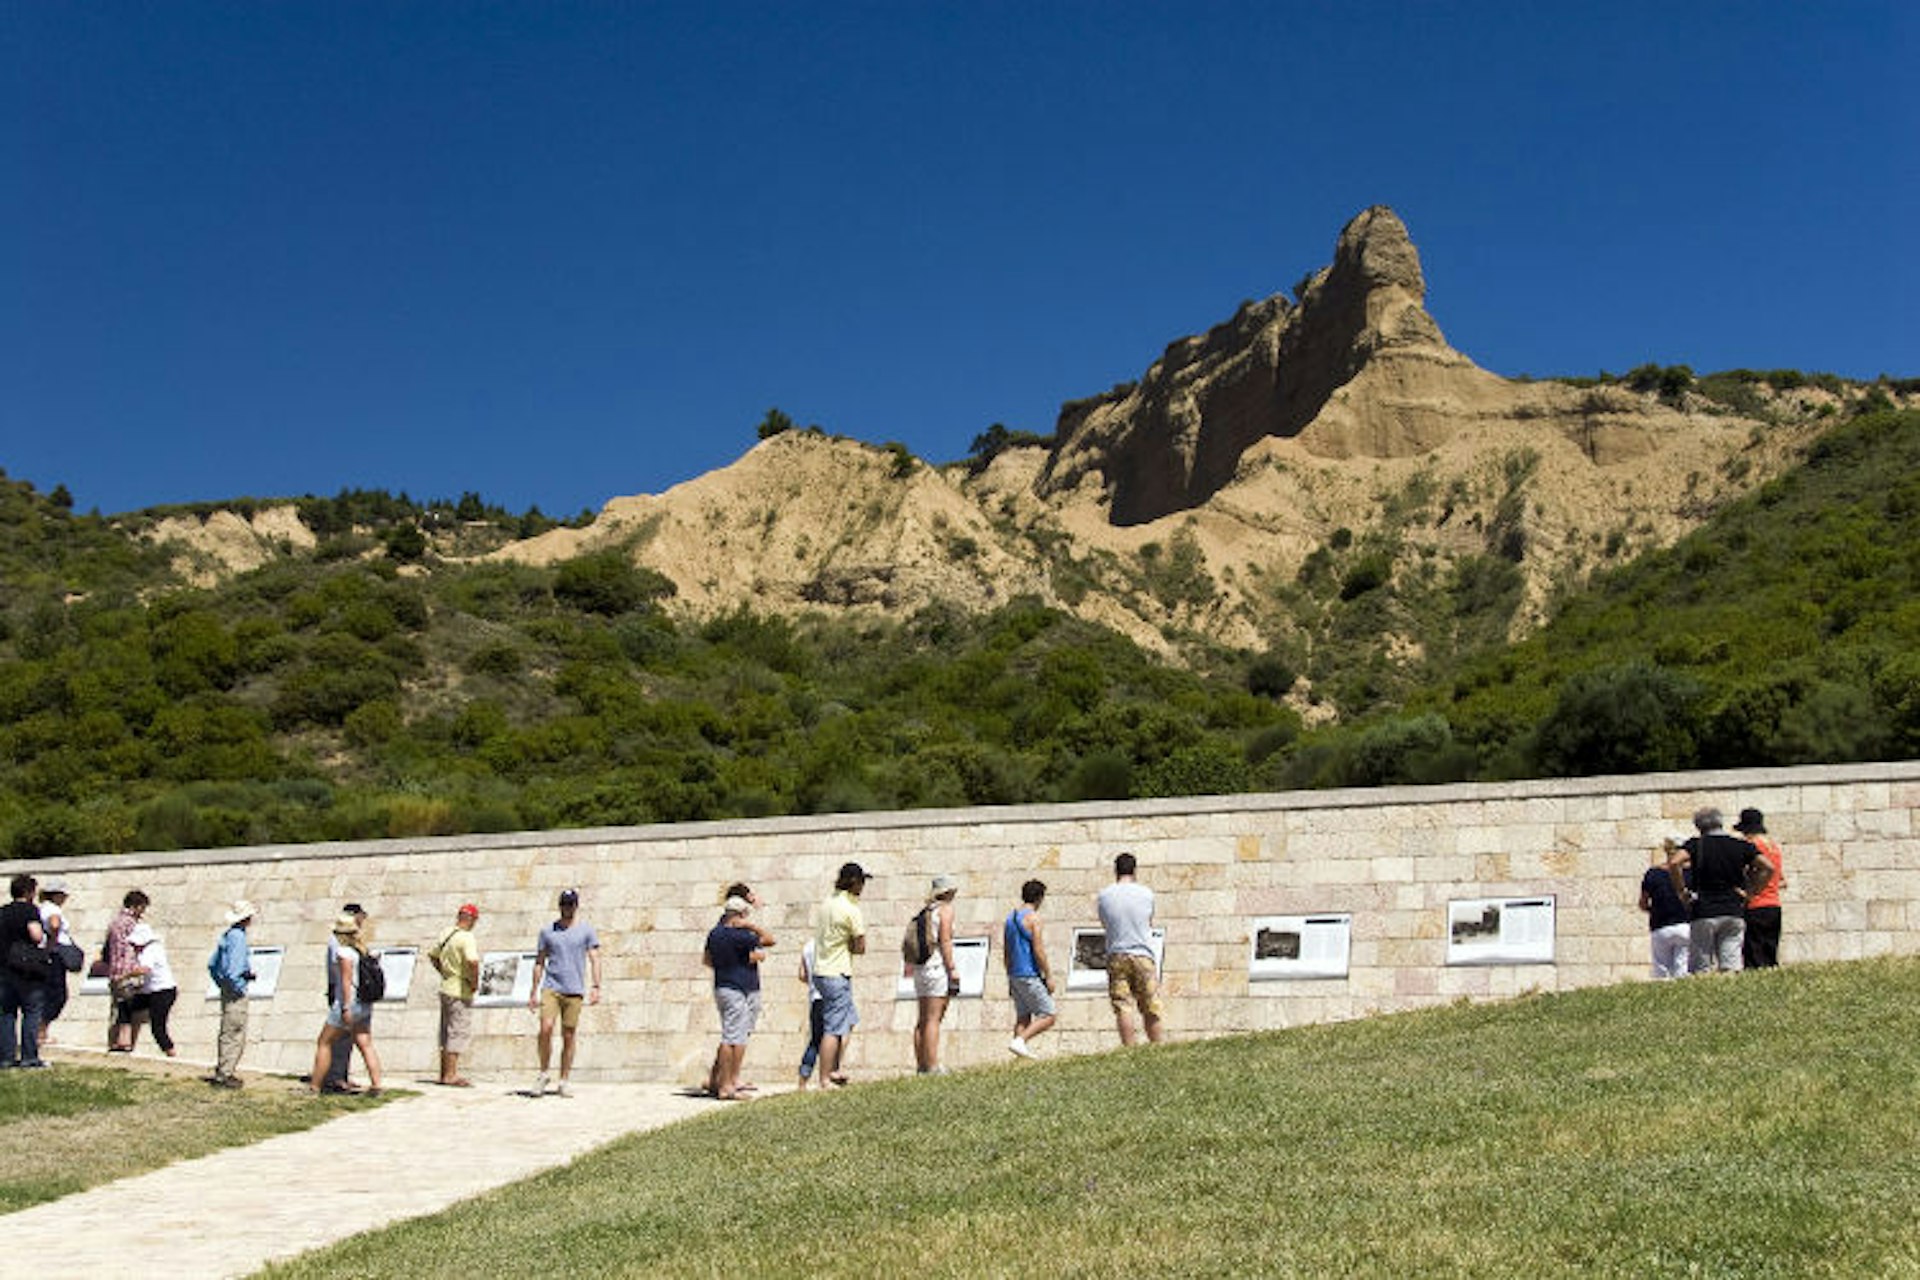 Gallipoli is a popular pilgrimage site for relatives of Anzac soldiers. Image by Dennis K. Johnson / Lonely Planet images / Getty Images